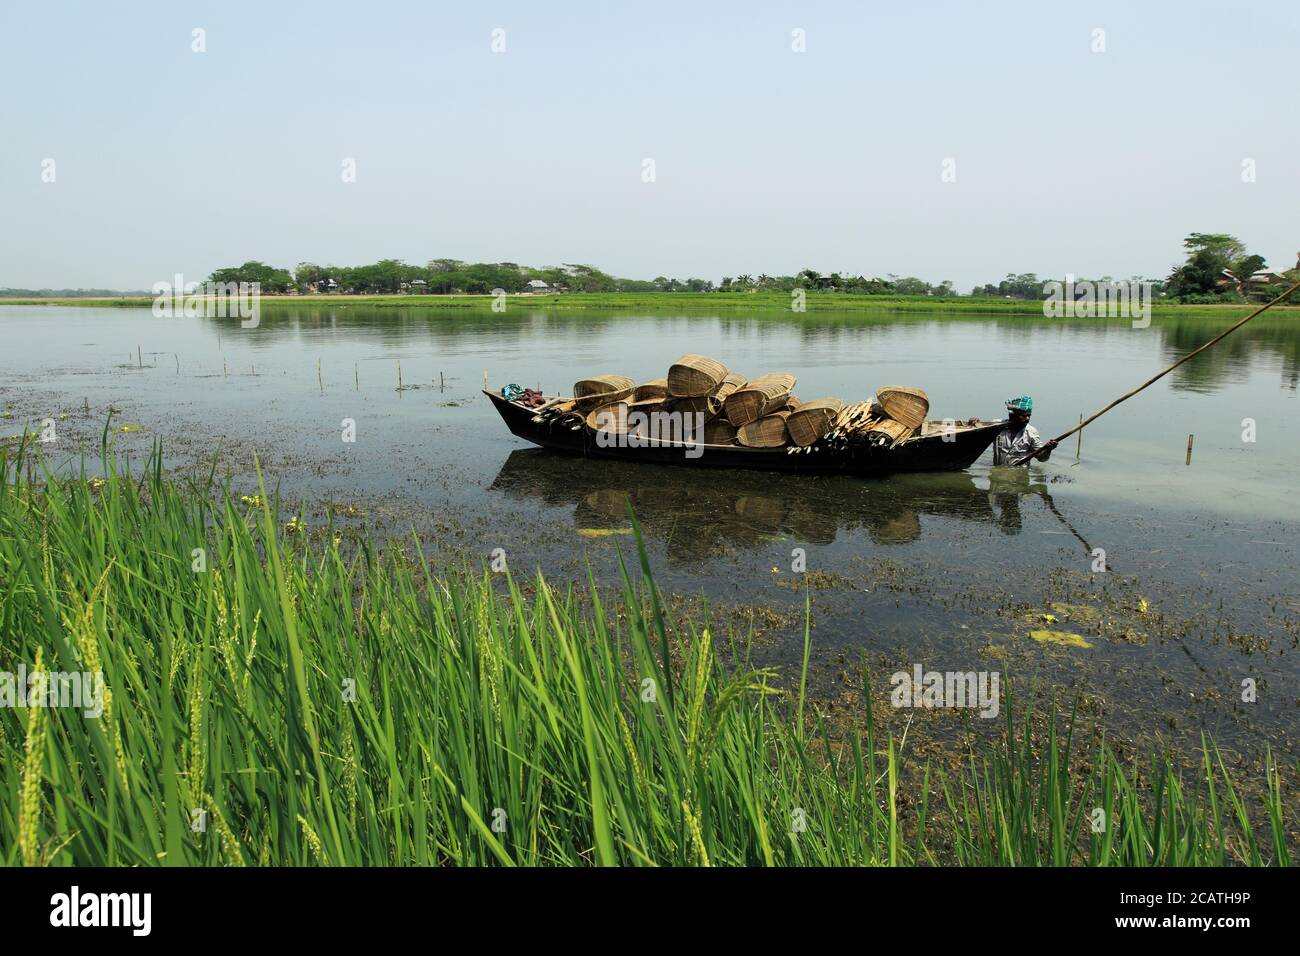 Traditional, Bangladesh boats on the bank of Jamuna the river. In the delta of rivers Ganga (Padma), the Brahmaputra, and Meghna people live on the water. Stock Photo